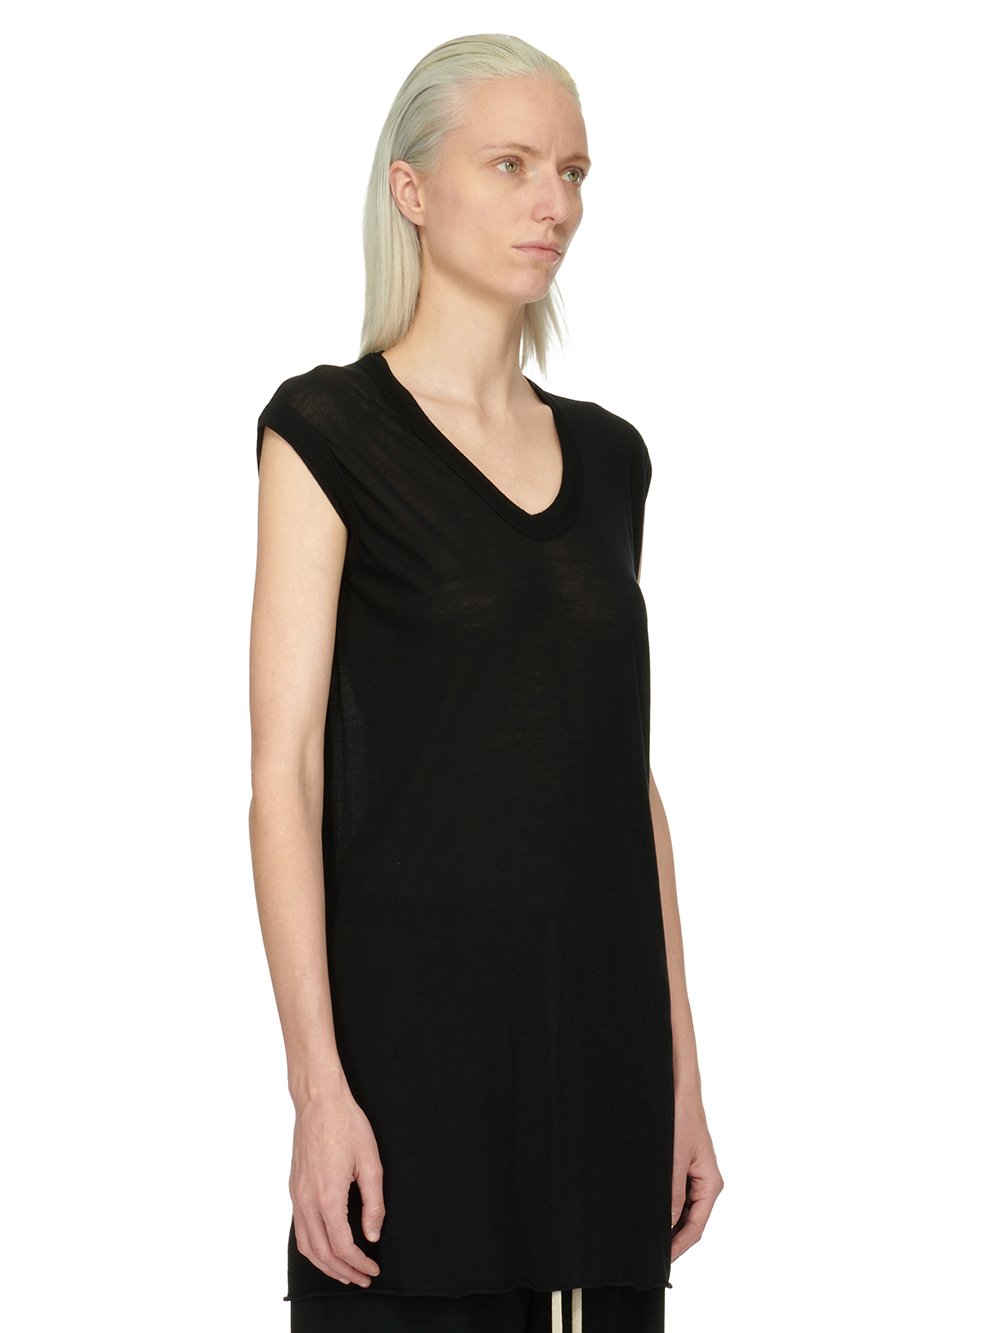 RICK OWENS FOREVER BASIC SL T IN BLACK UNSTABLE COTTON